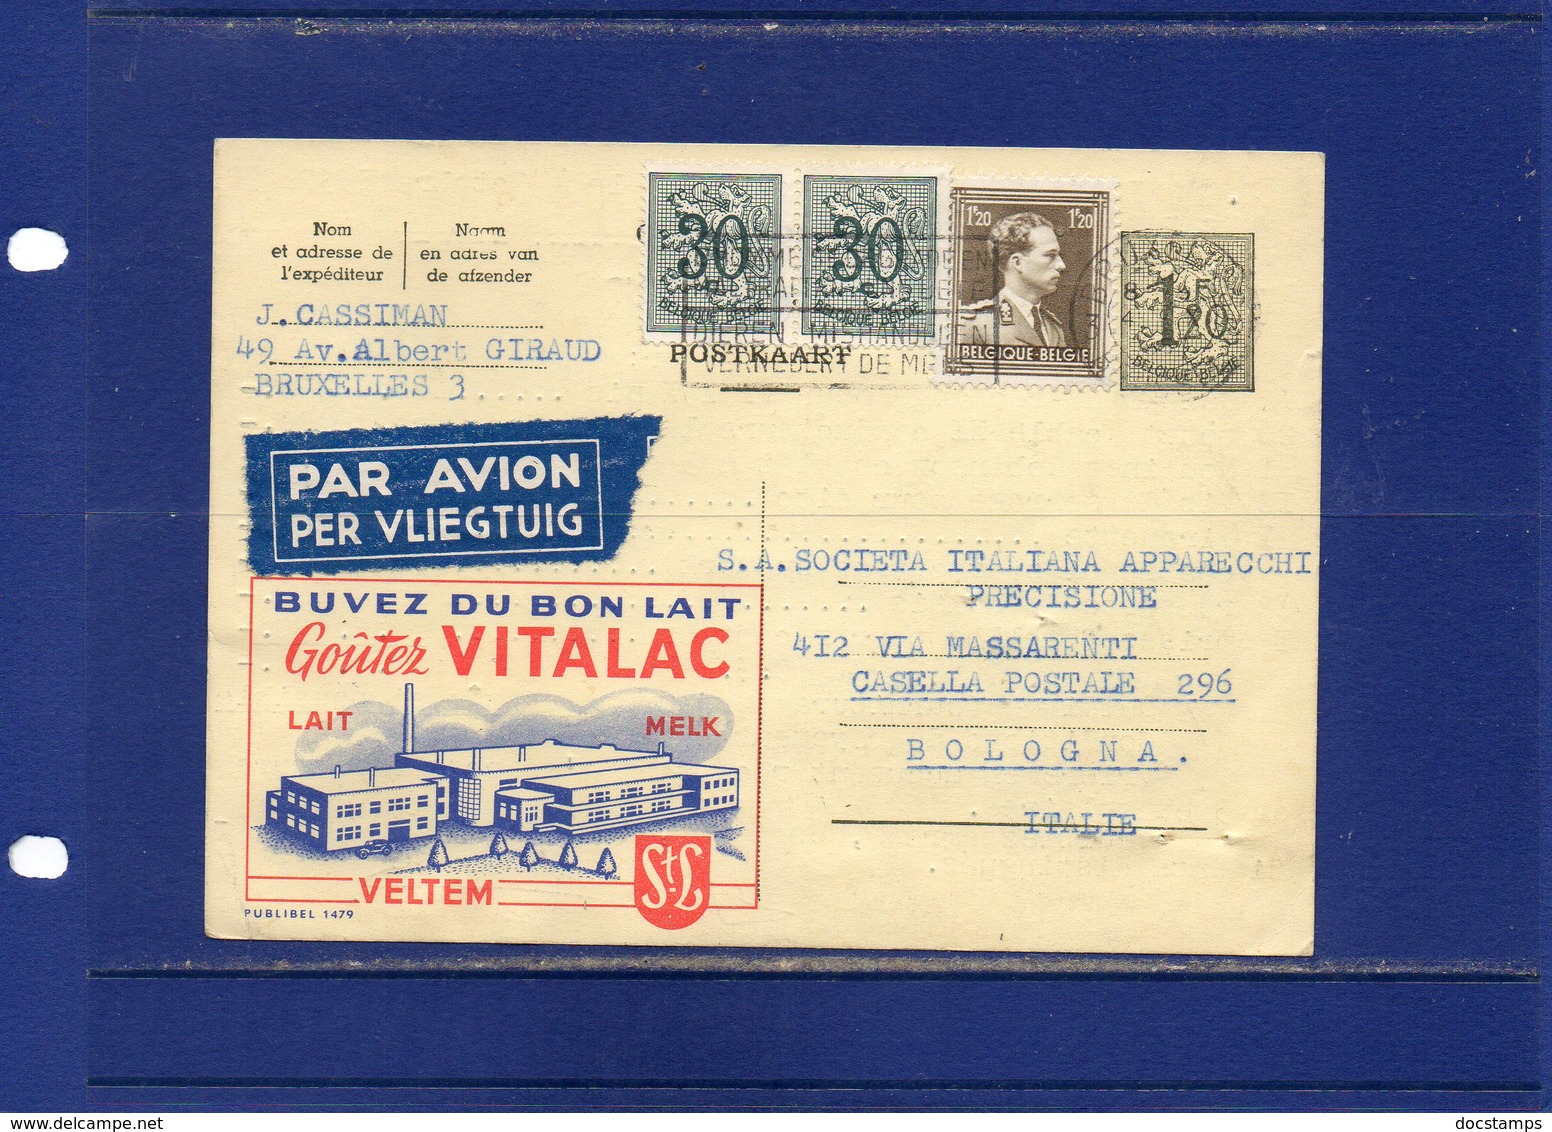 ##(DAN185)-1957- Belgium-advertising Postcard Vitalac Milk Sent By Air Mail From Bruxelles To Bologna (Italy) - Food